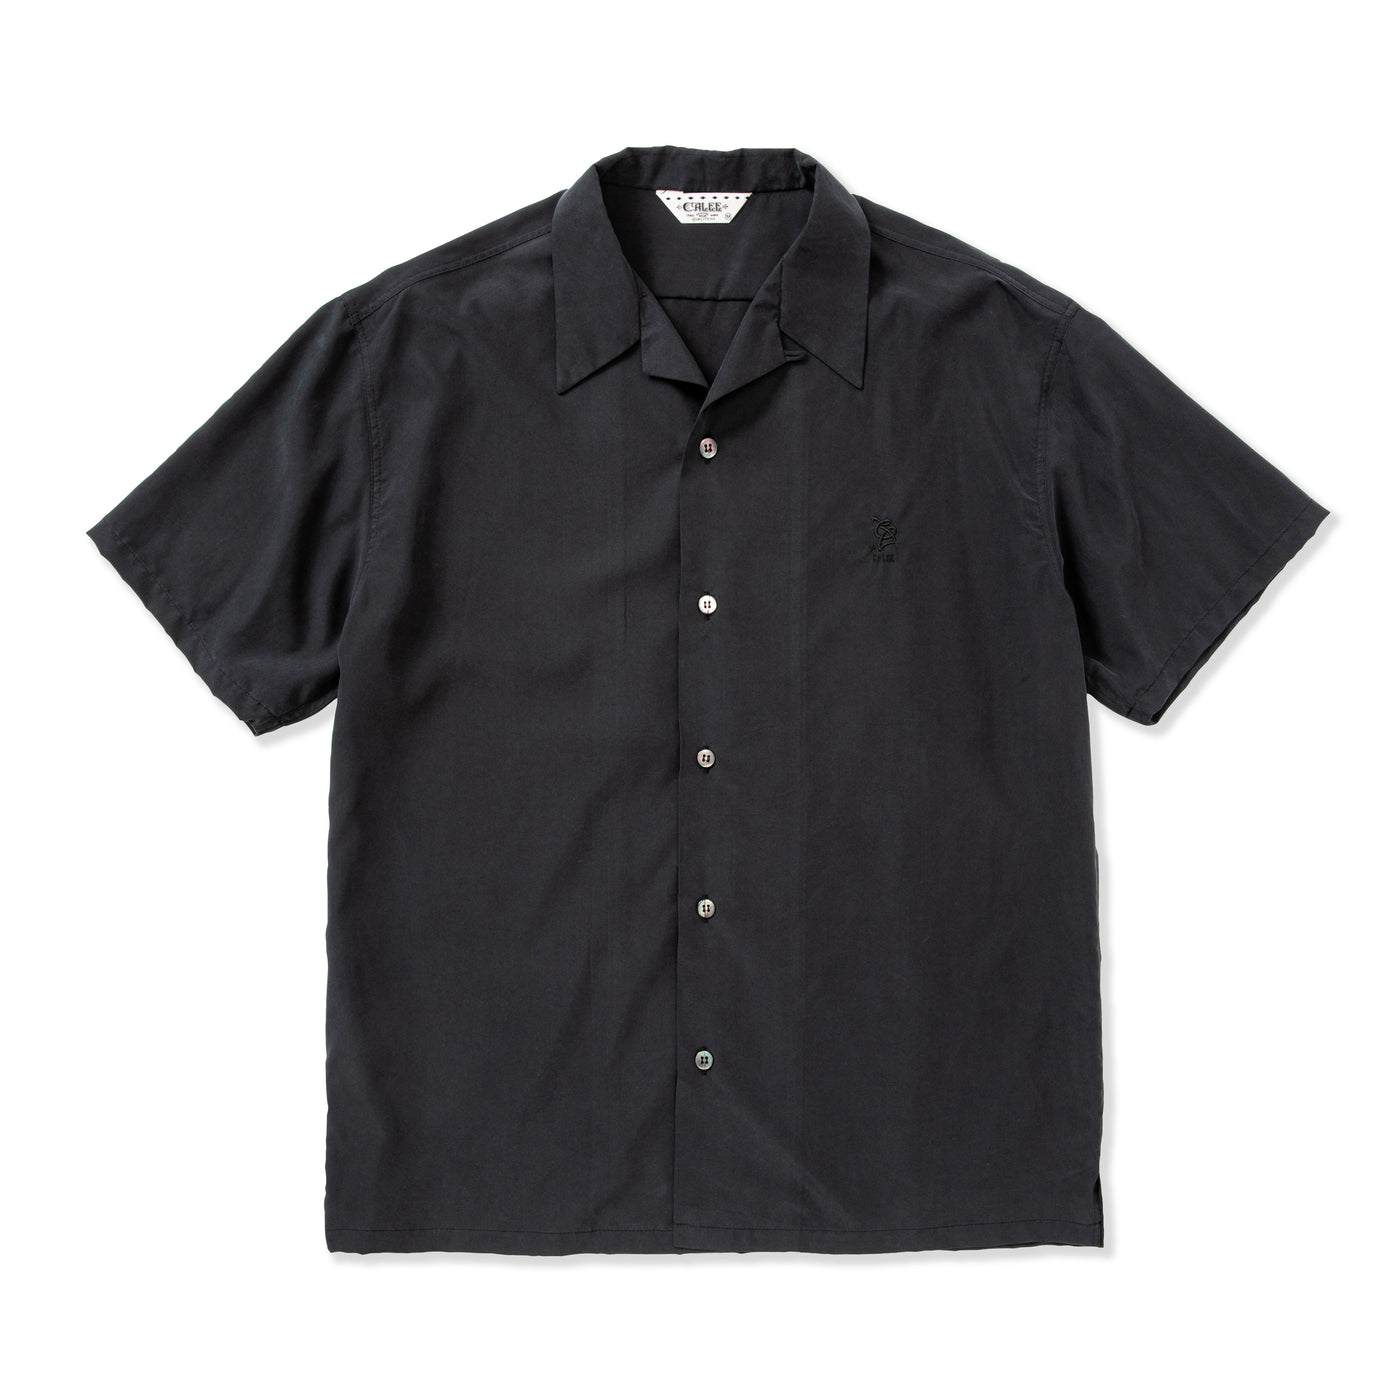 R/P SILKY TOUCH CAL LOGO EMBROIDERY S/S SHIRT